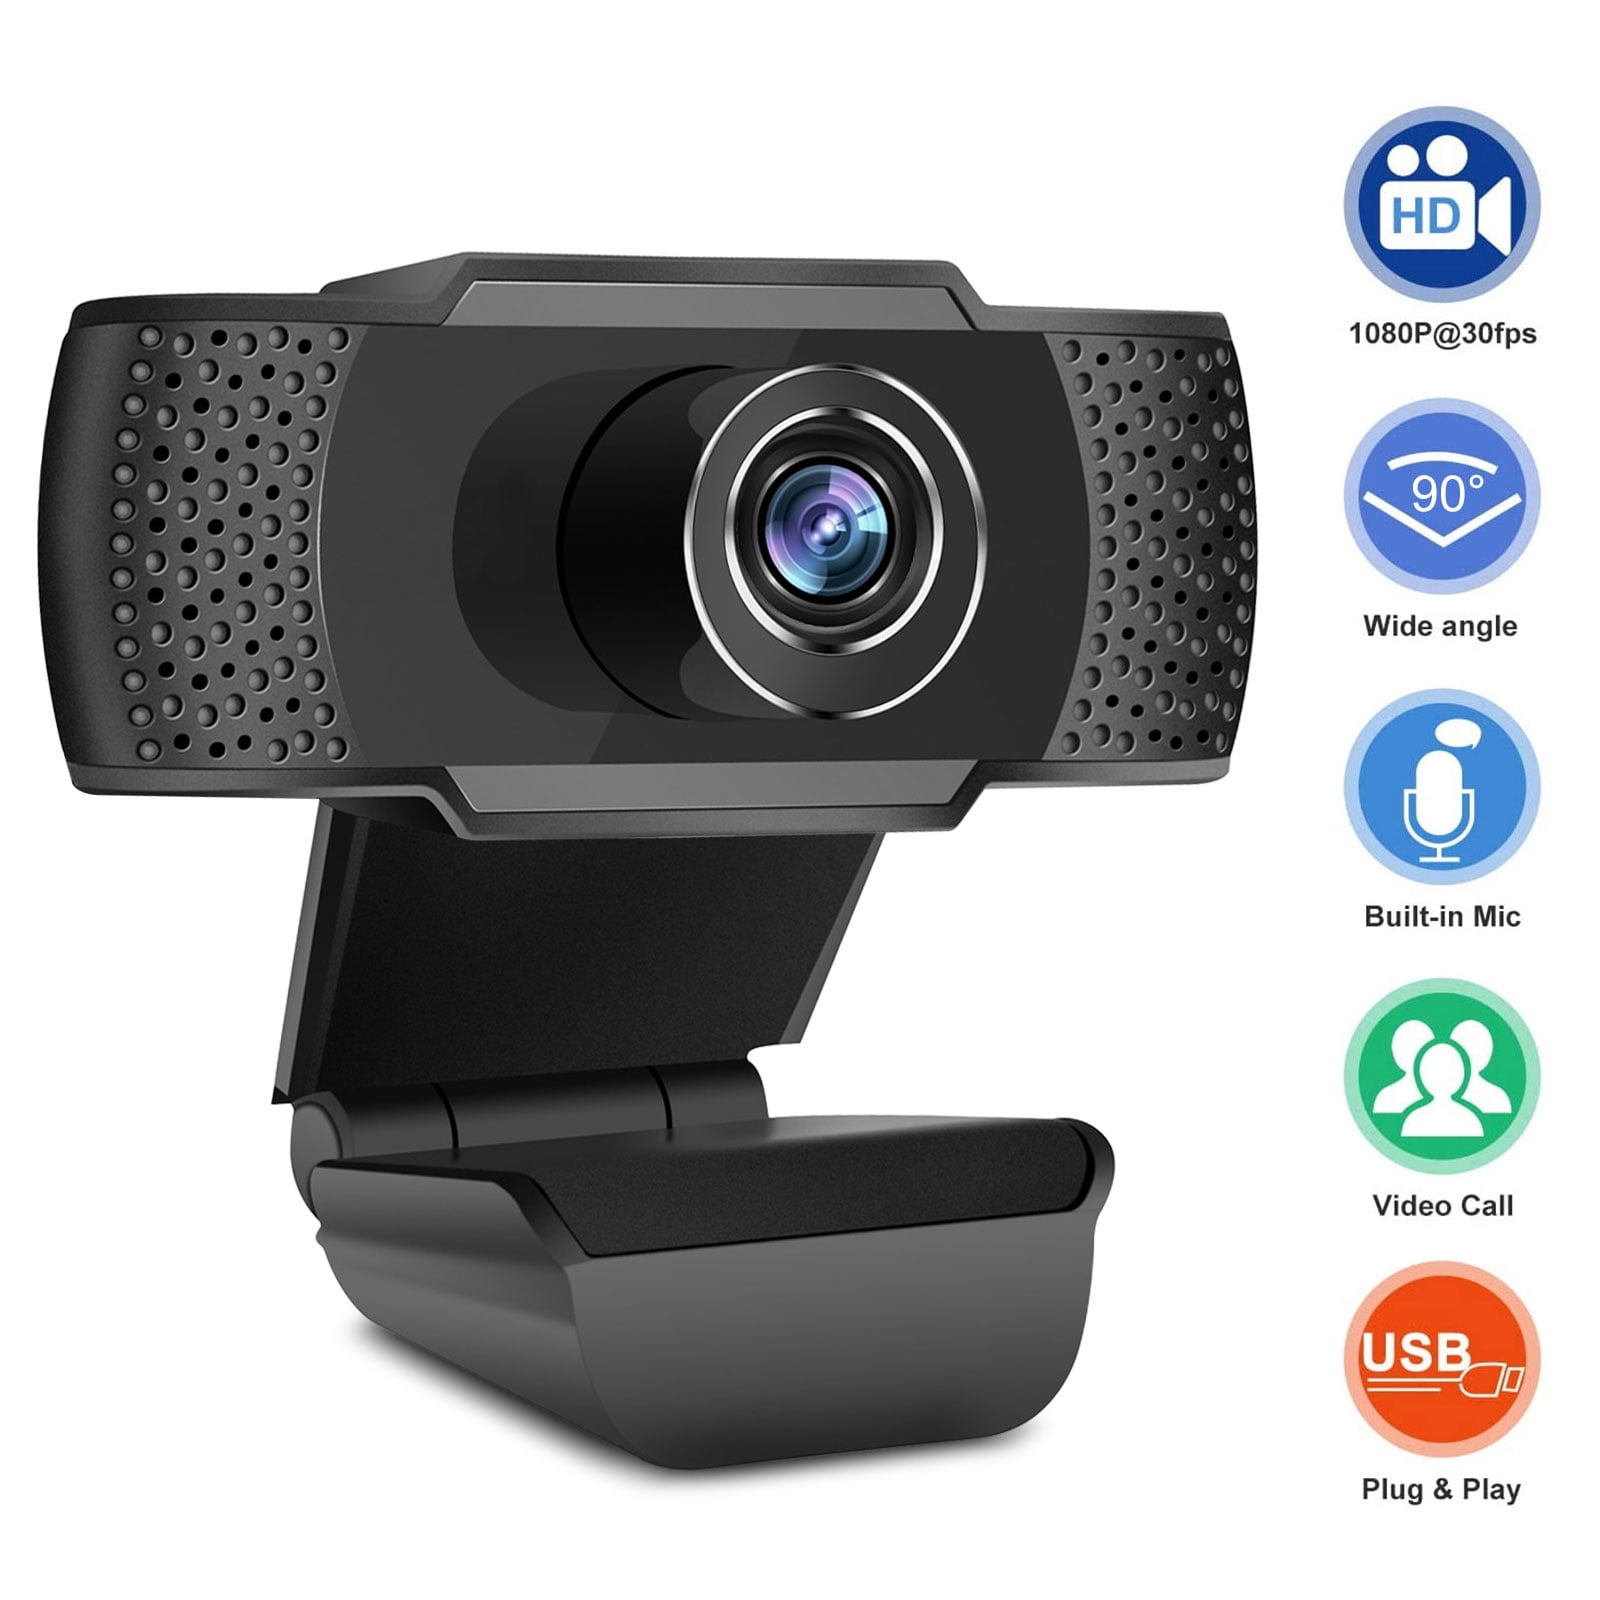 Aode Webcam 1080P Full HD Stereo Microphone USB Computer Web Camera Video Chat for Recording Streaming Gaming Conferencing Mac Windows PC Laptop Desktop Xbox Skype OBS Twitch YouTube Xsplit